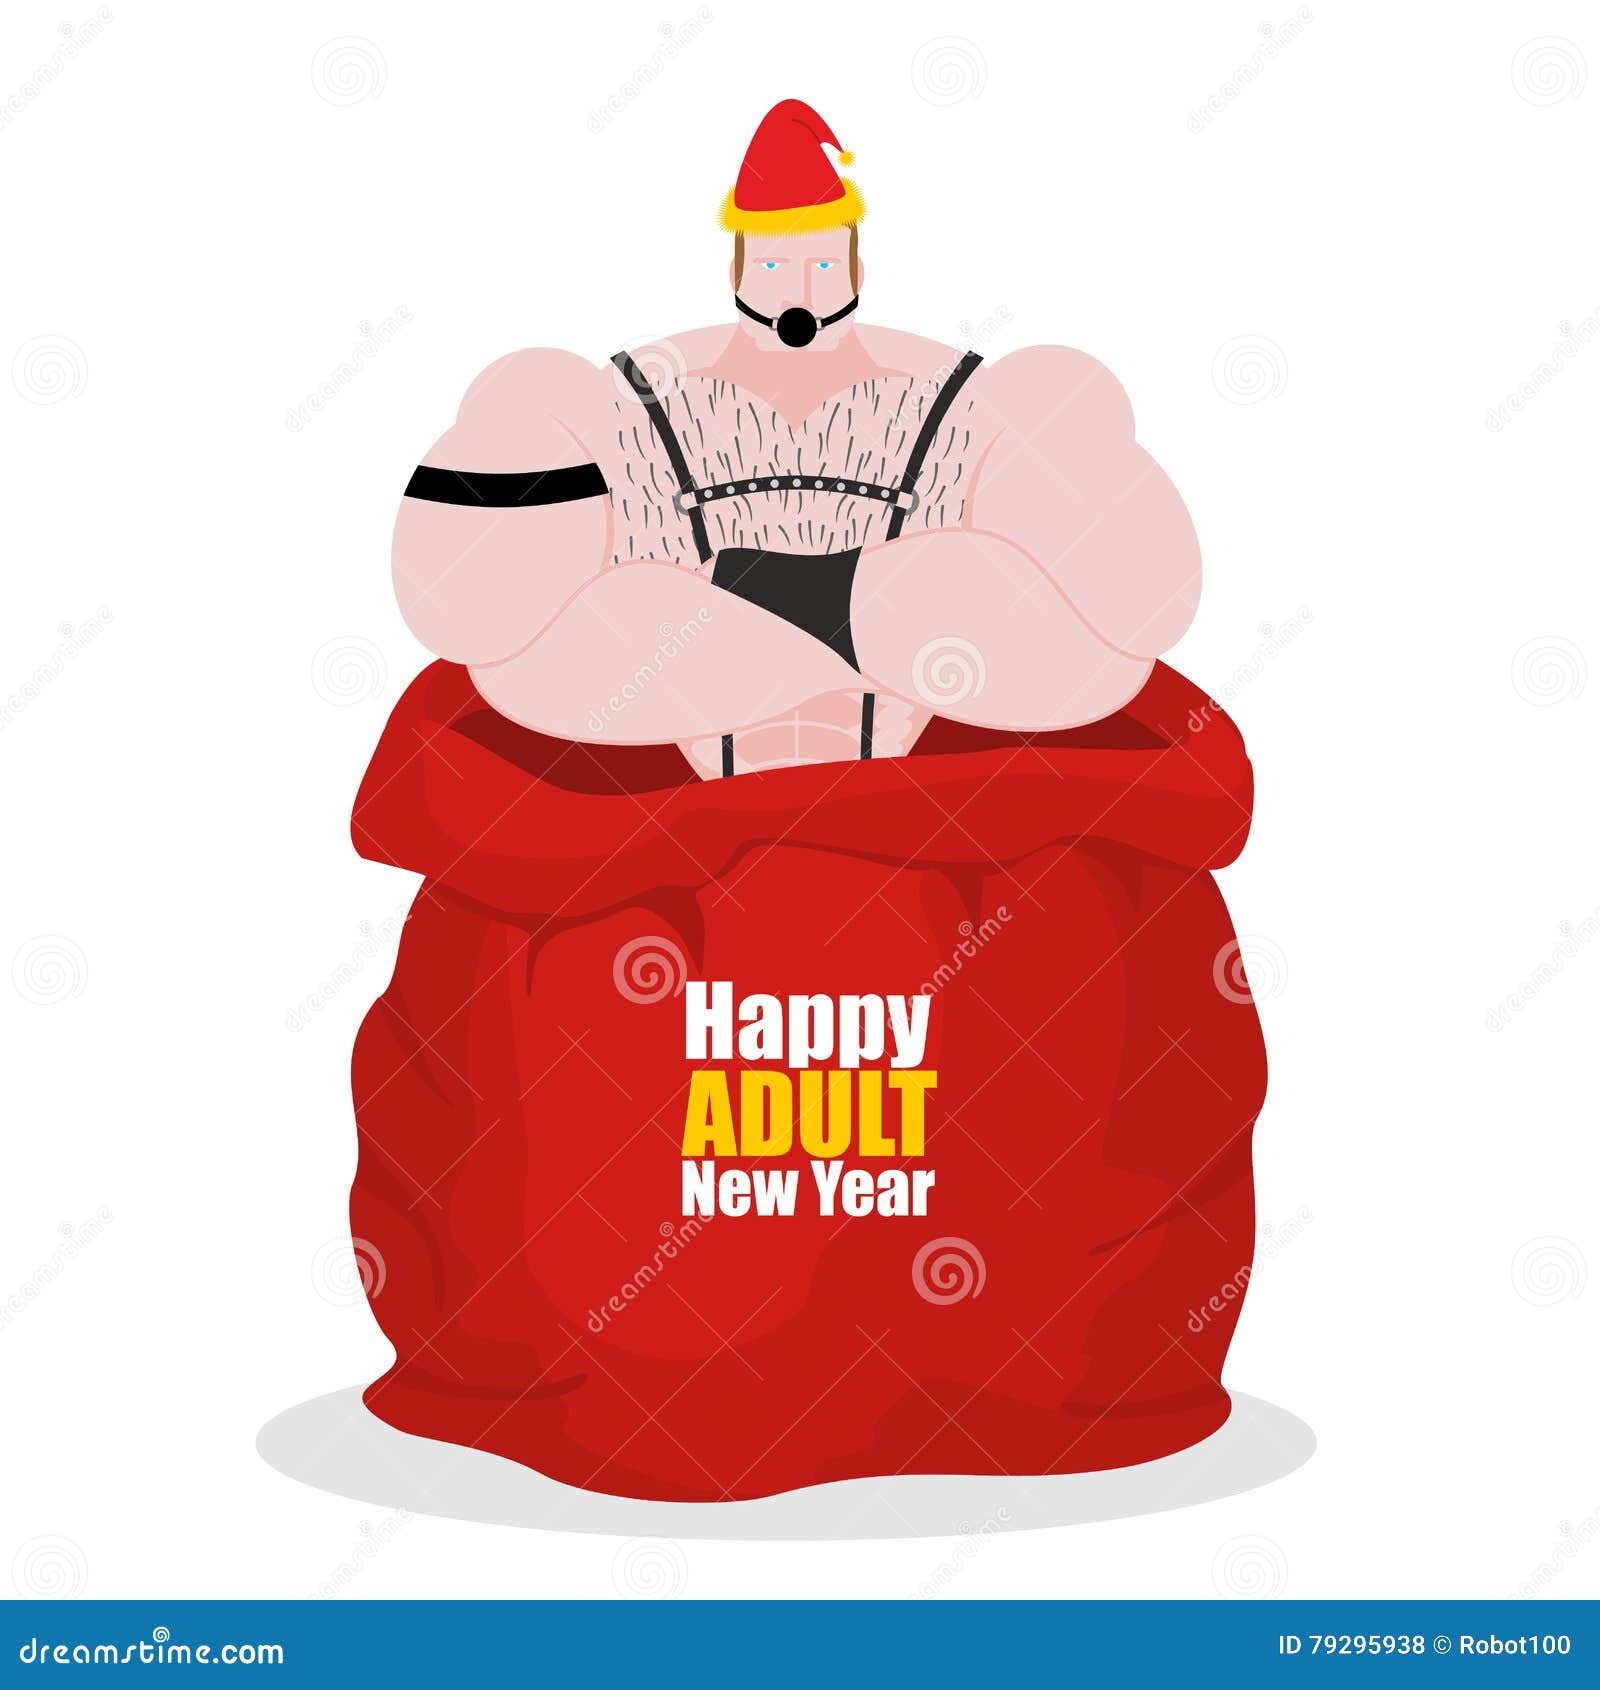 Erotic Sex Cartoon Santa Claus - Adult New Year. BDSM Slave in Red Sack of Santa Claus Stock Vector -  Illustration of adult, person: 79295938